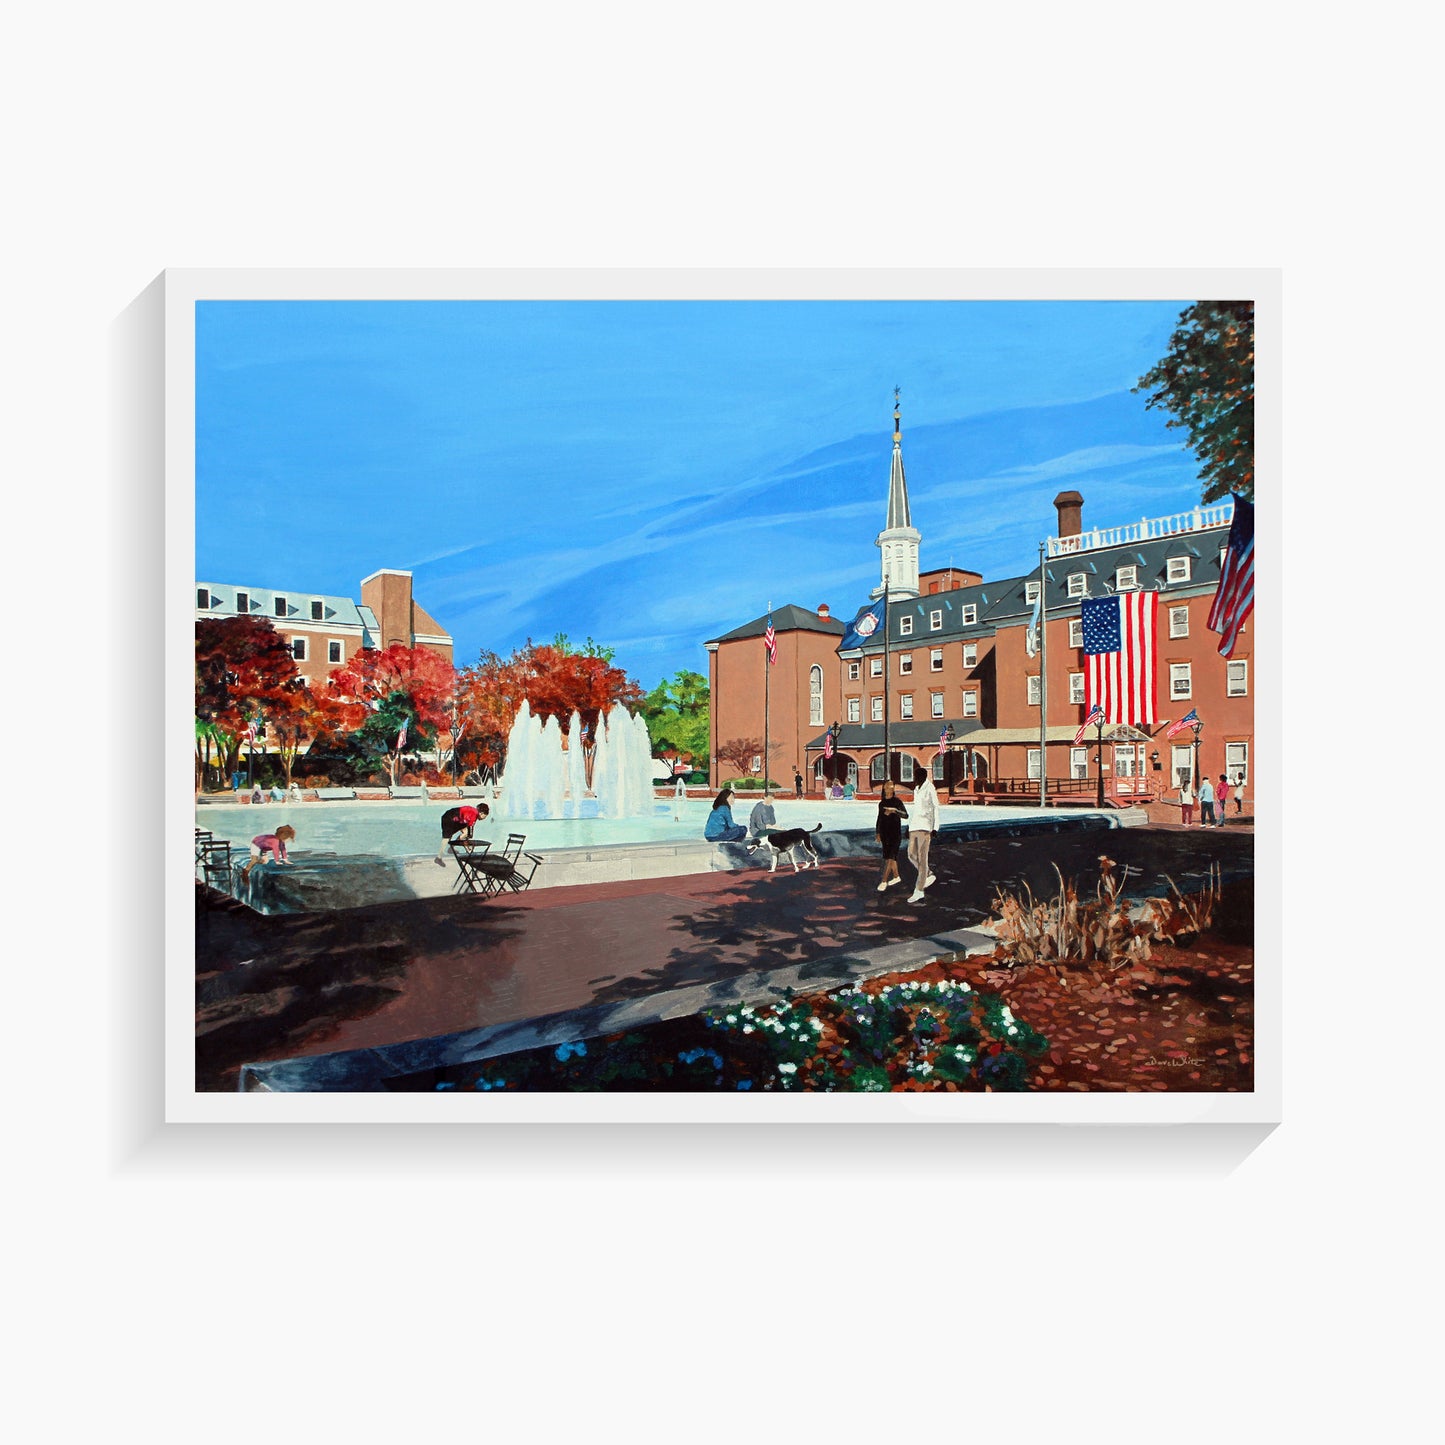 Old Town Alexandria Painting Art Print by Artist Dave White, City Hall and Market Square Plaza